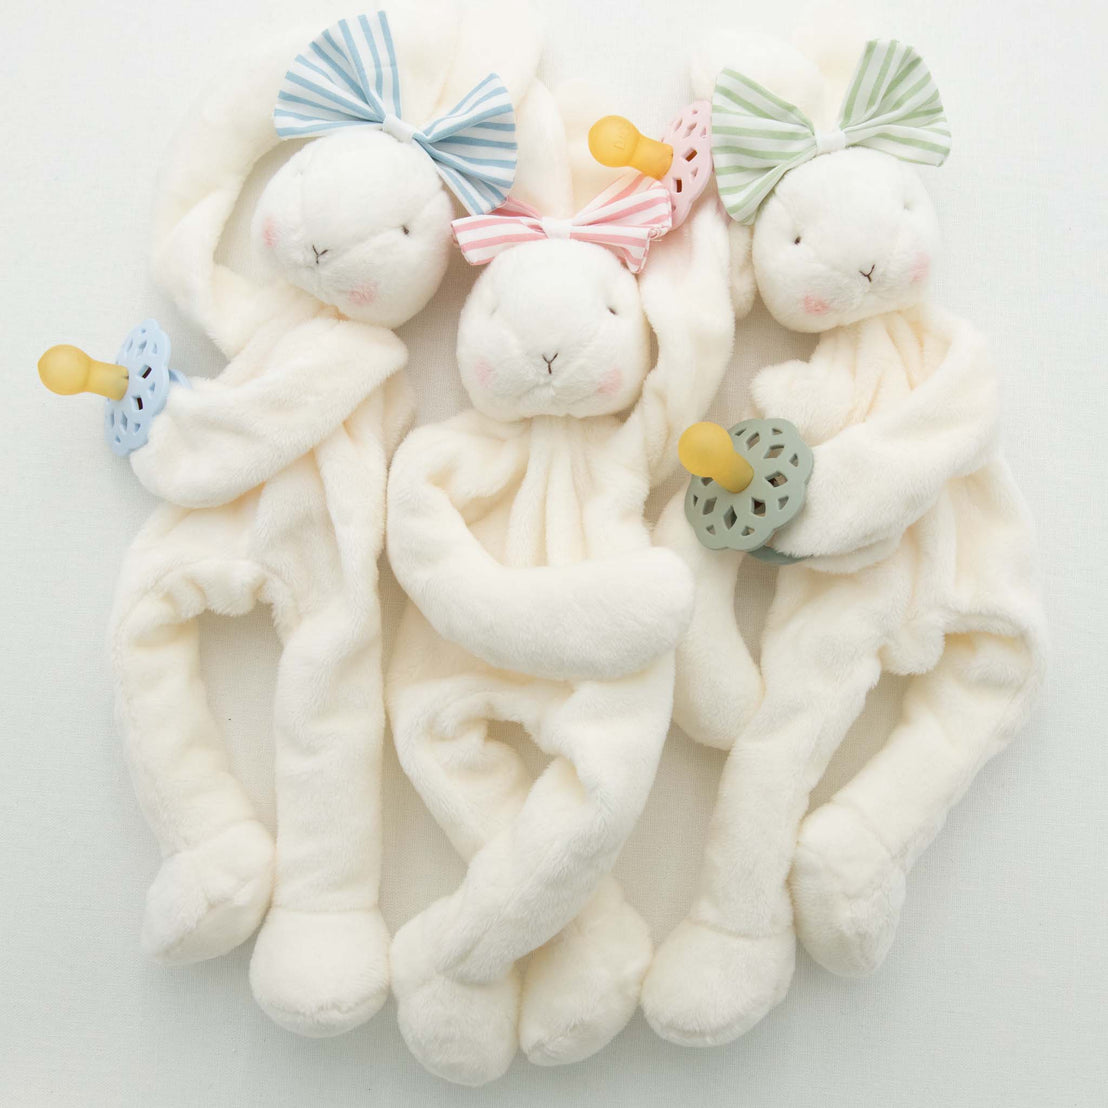 Three Thea Bunny Buddy with pacifiers on a white background, each featuring a different colored miniature version of the Thea Bow Headband: blue, pink, and green.